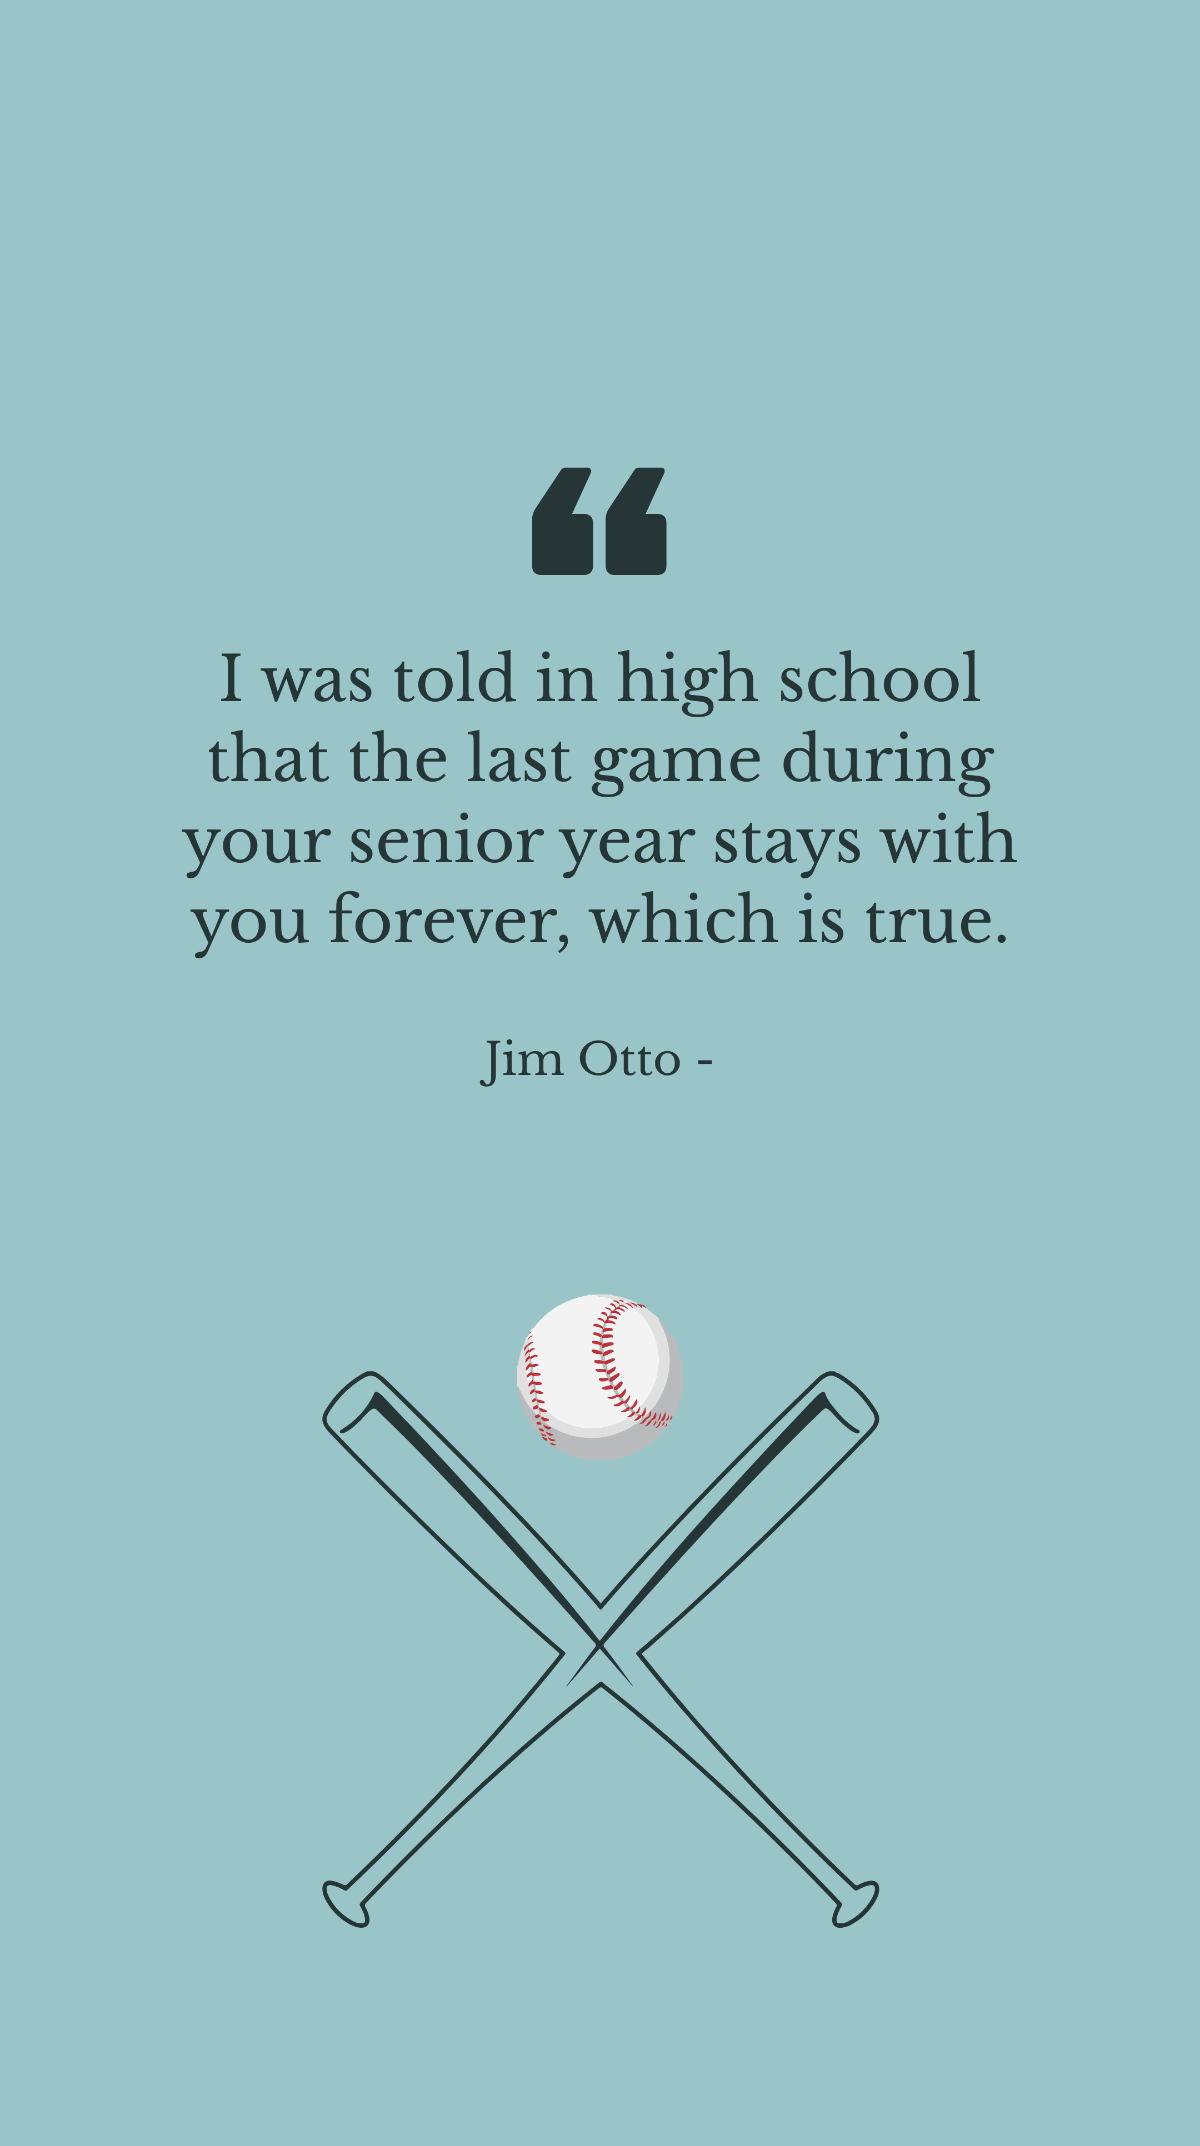 Jim Otto - I was told in high school that the last game during your senior year stays with you forever, which is true. Template